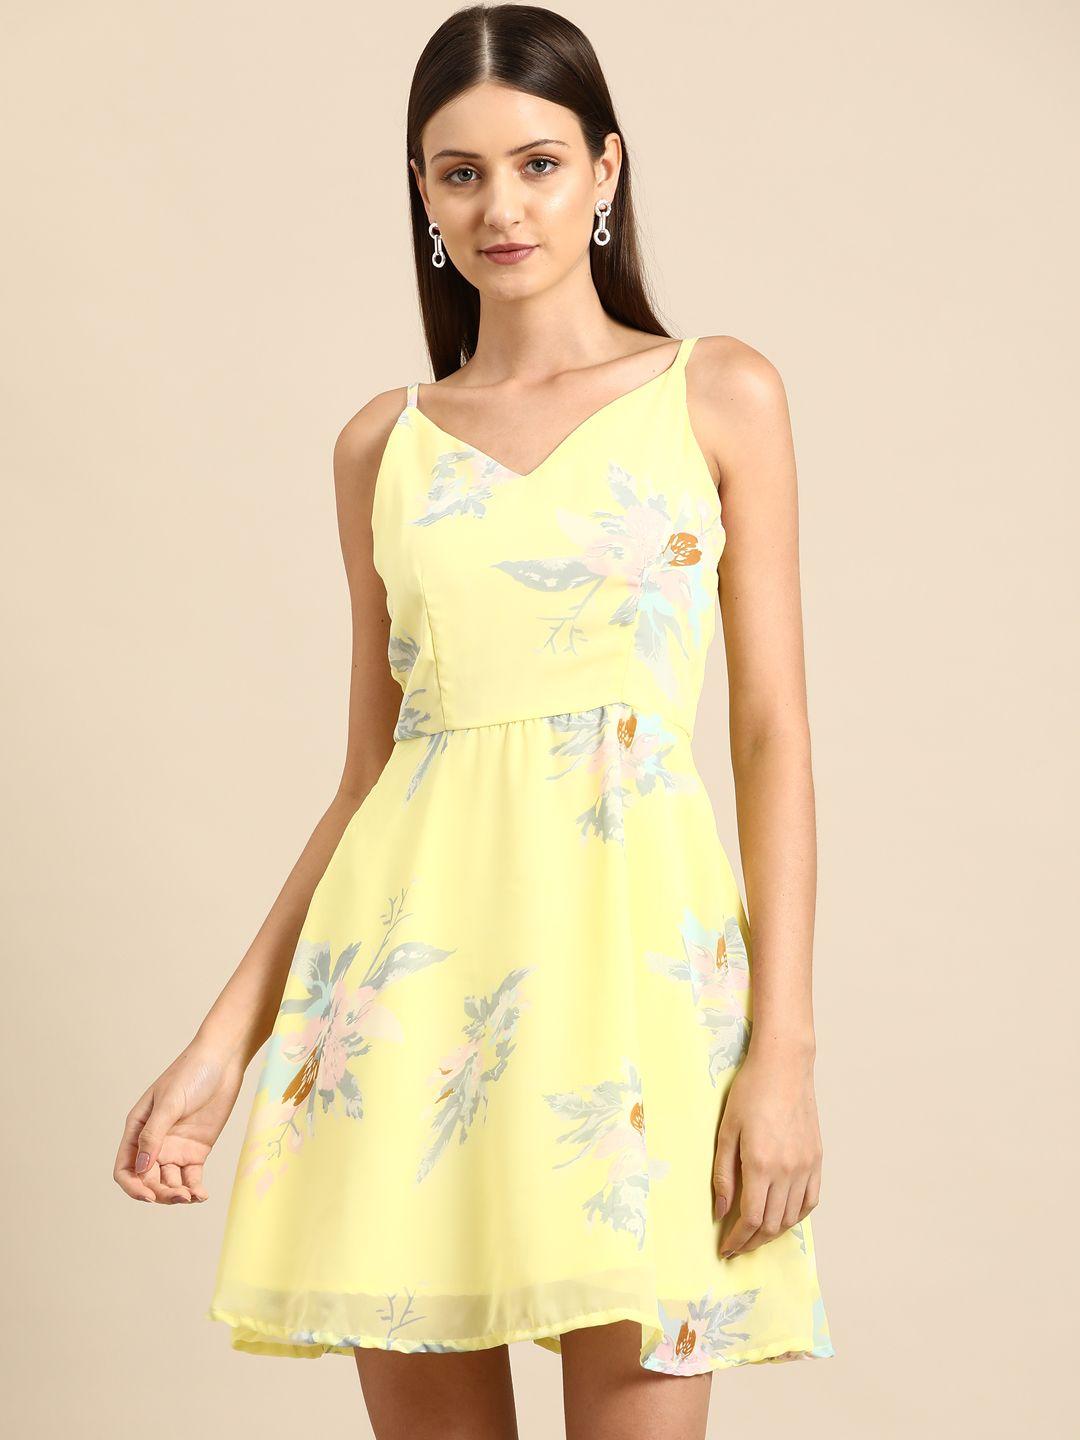 dodo & moa floral printed crepe fit & flare dress